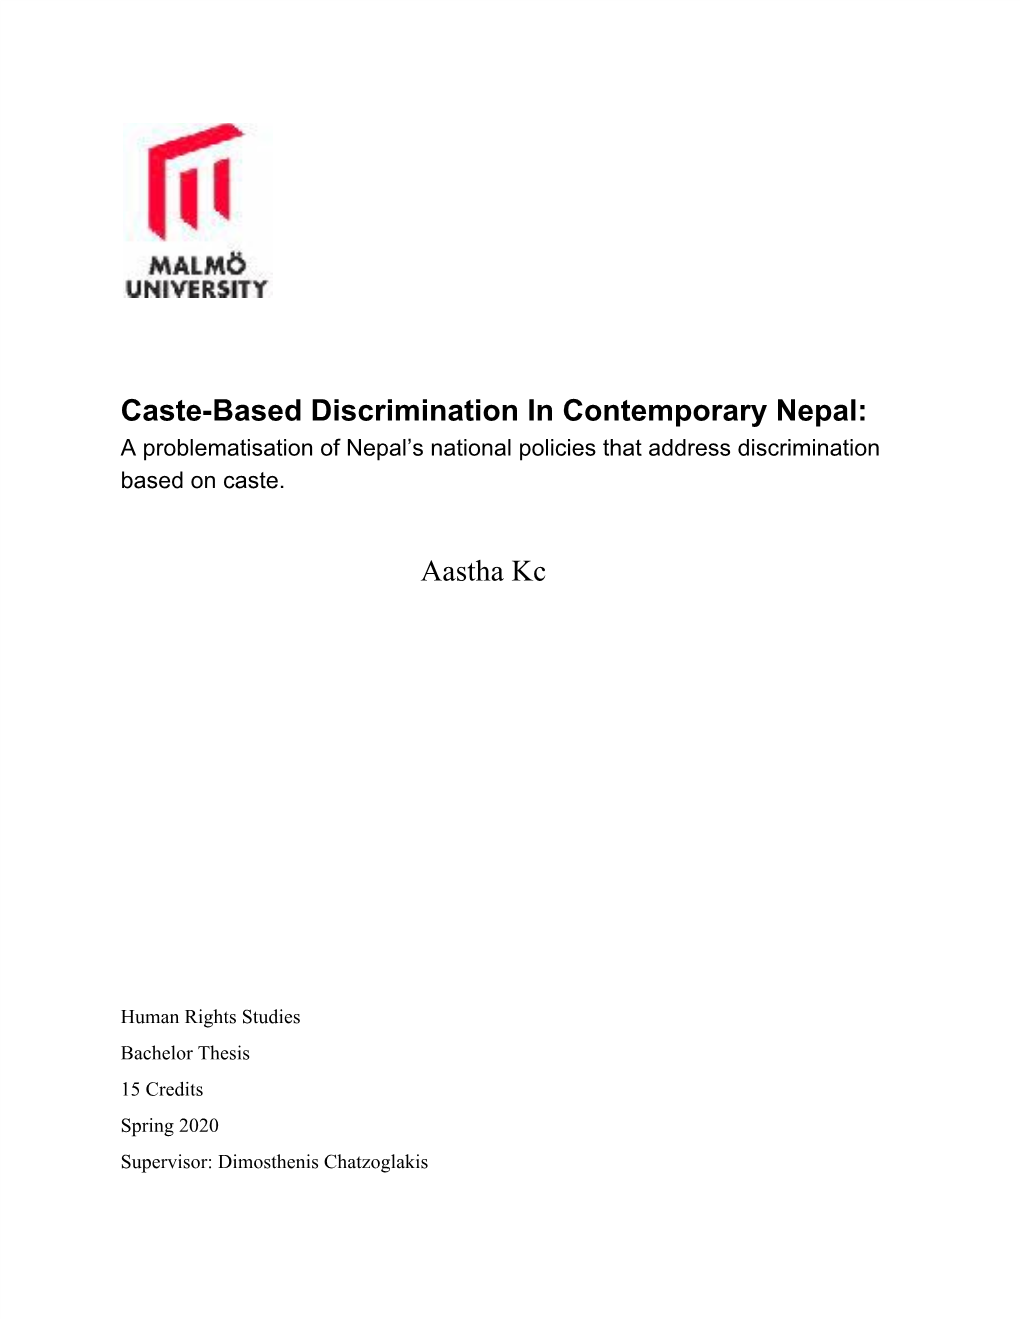 Caste-Based Discrimination in Contemporary Nepal: a Problematisation of Nepal’S National Policies That Address Discrimination Based on Caste